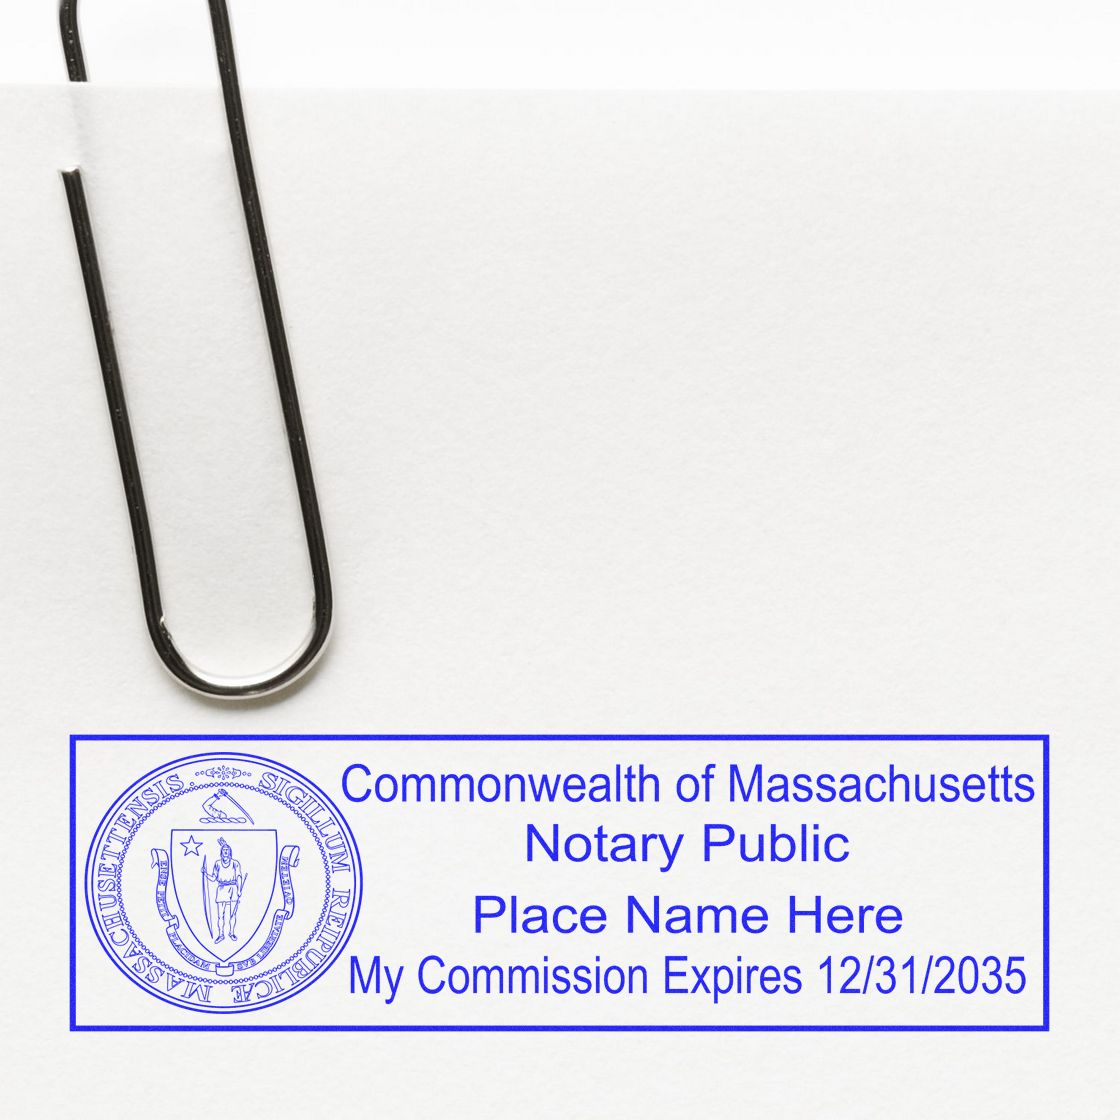 A stamped impression of the Super Slim Massachusetts Notary Public Stamp in this stylish lifestyle photo, setting the tone for a unique and personalized product.